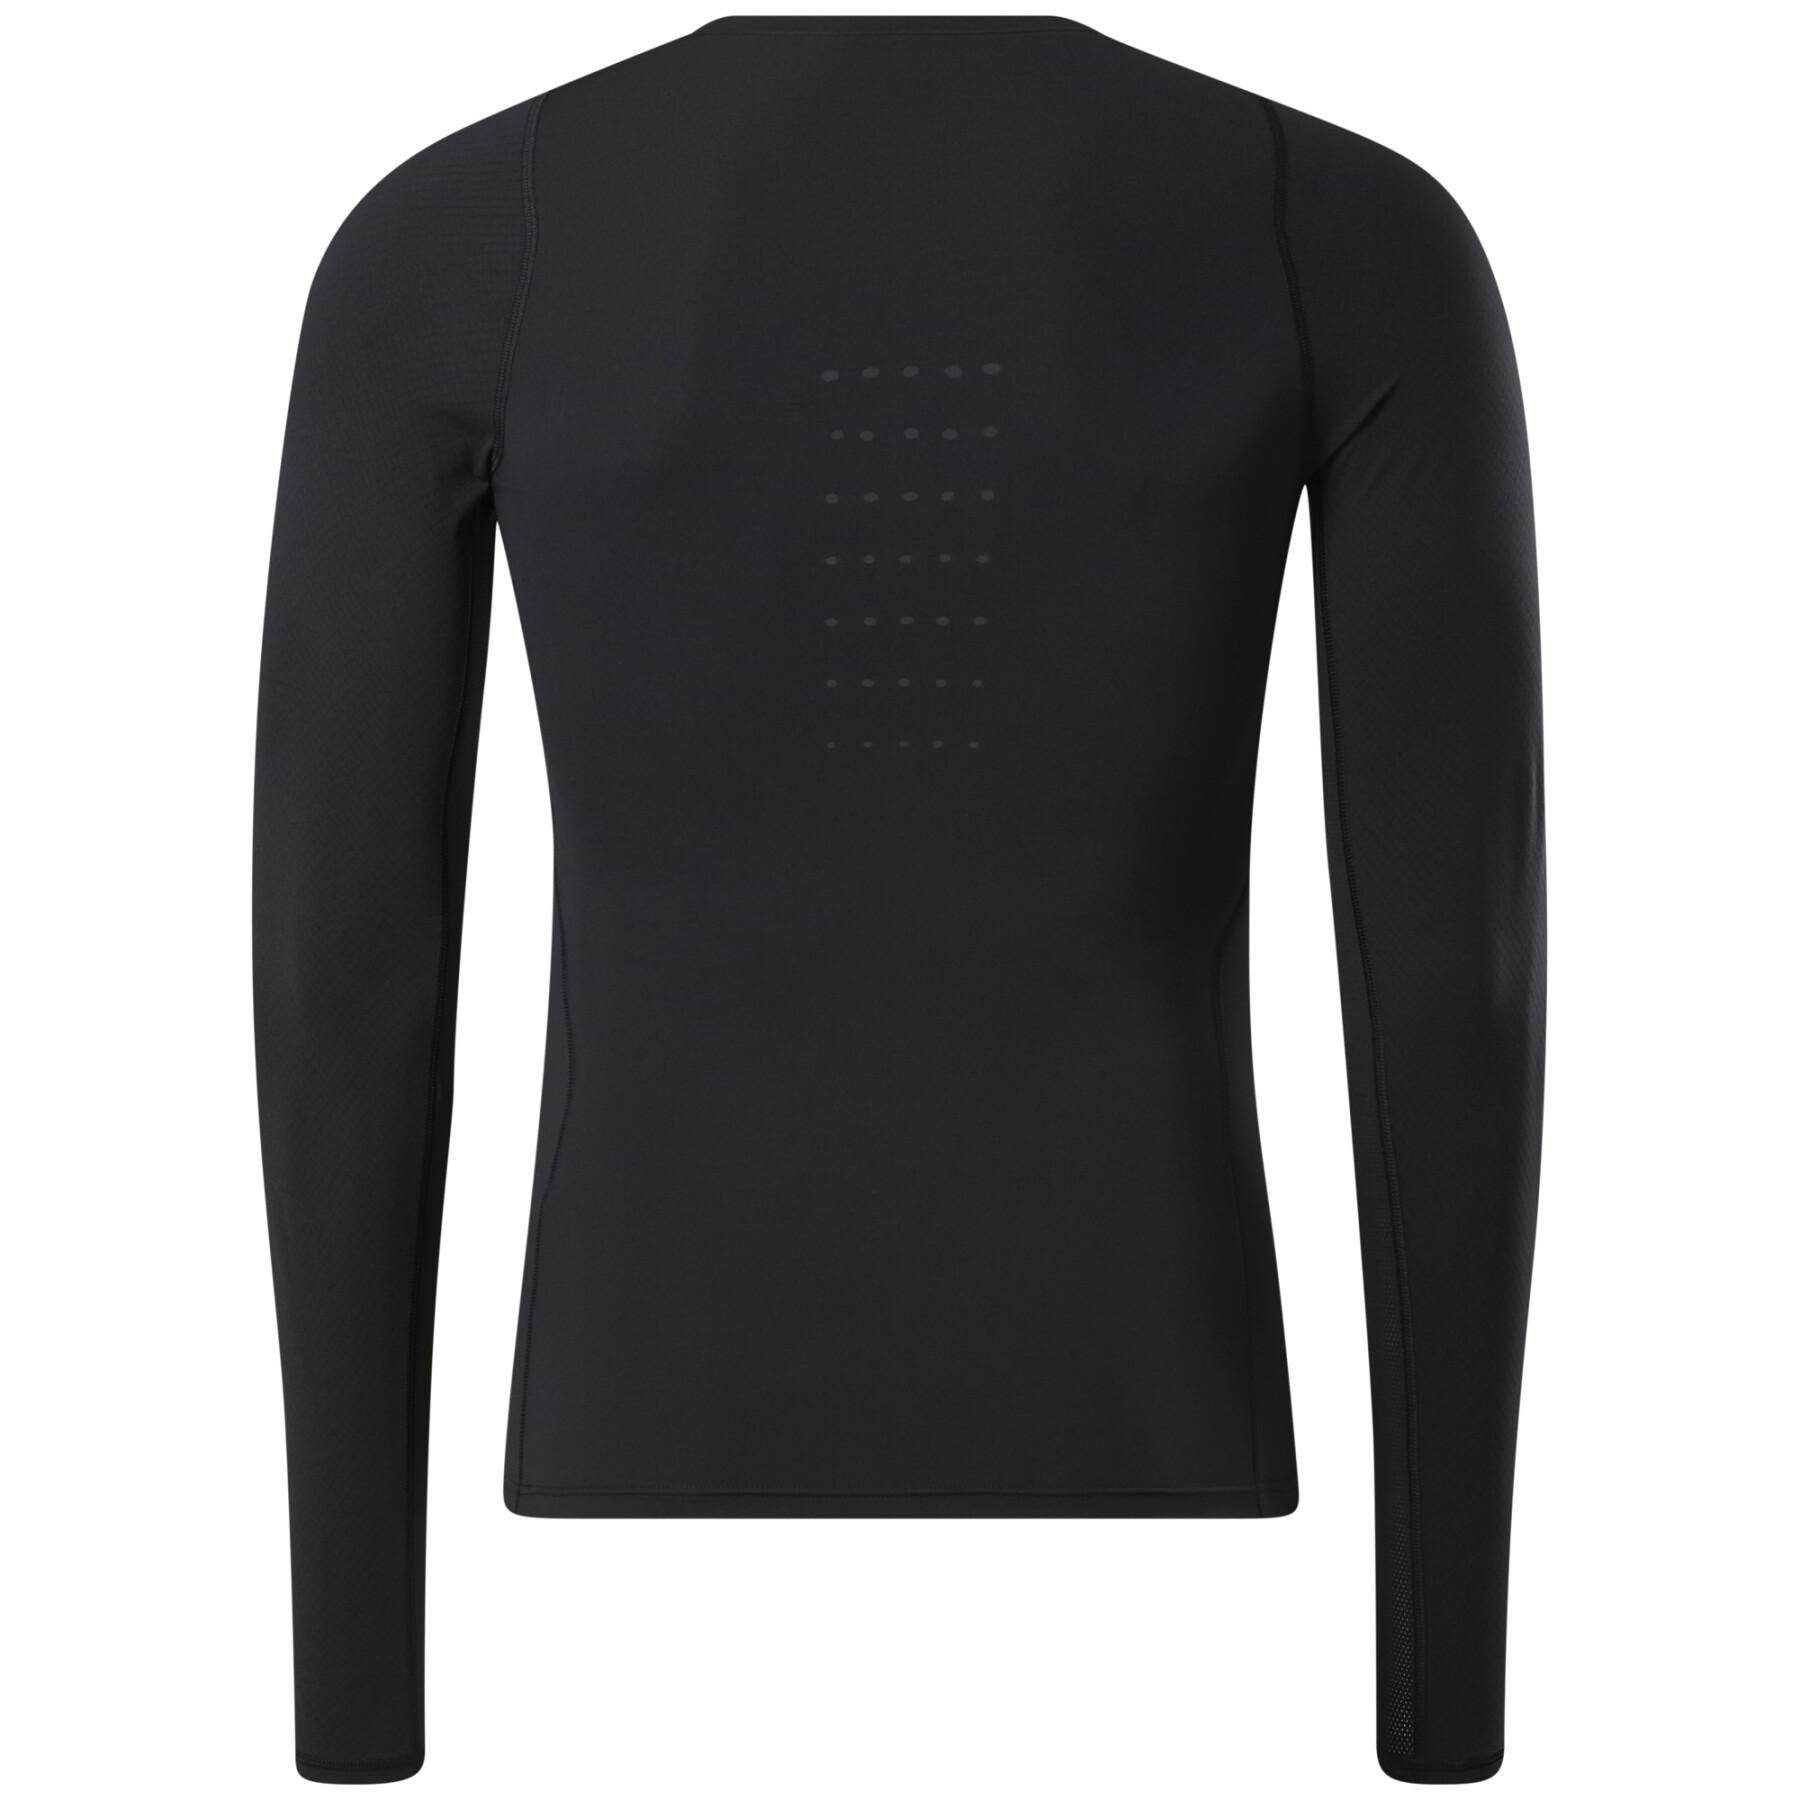 Maillot de compression Reebok United by Fitness